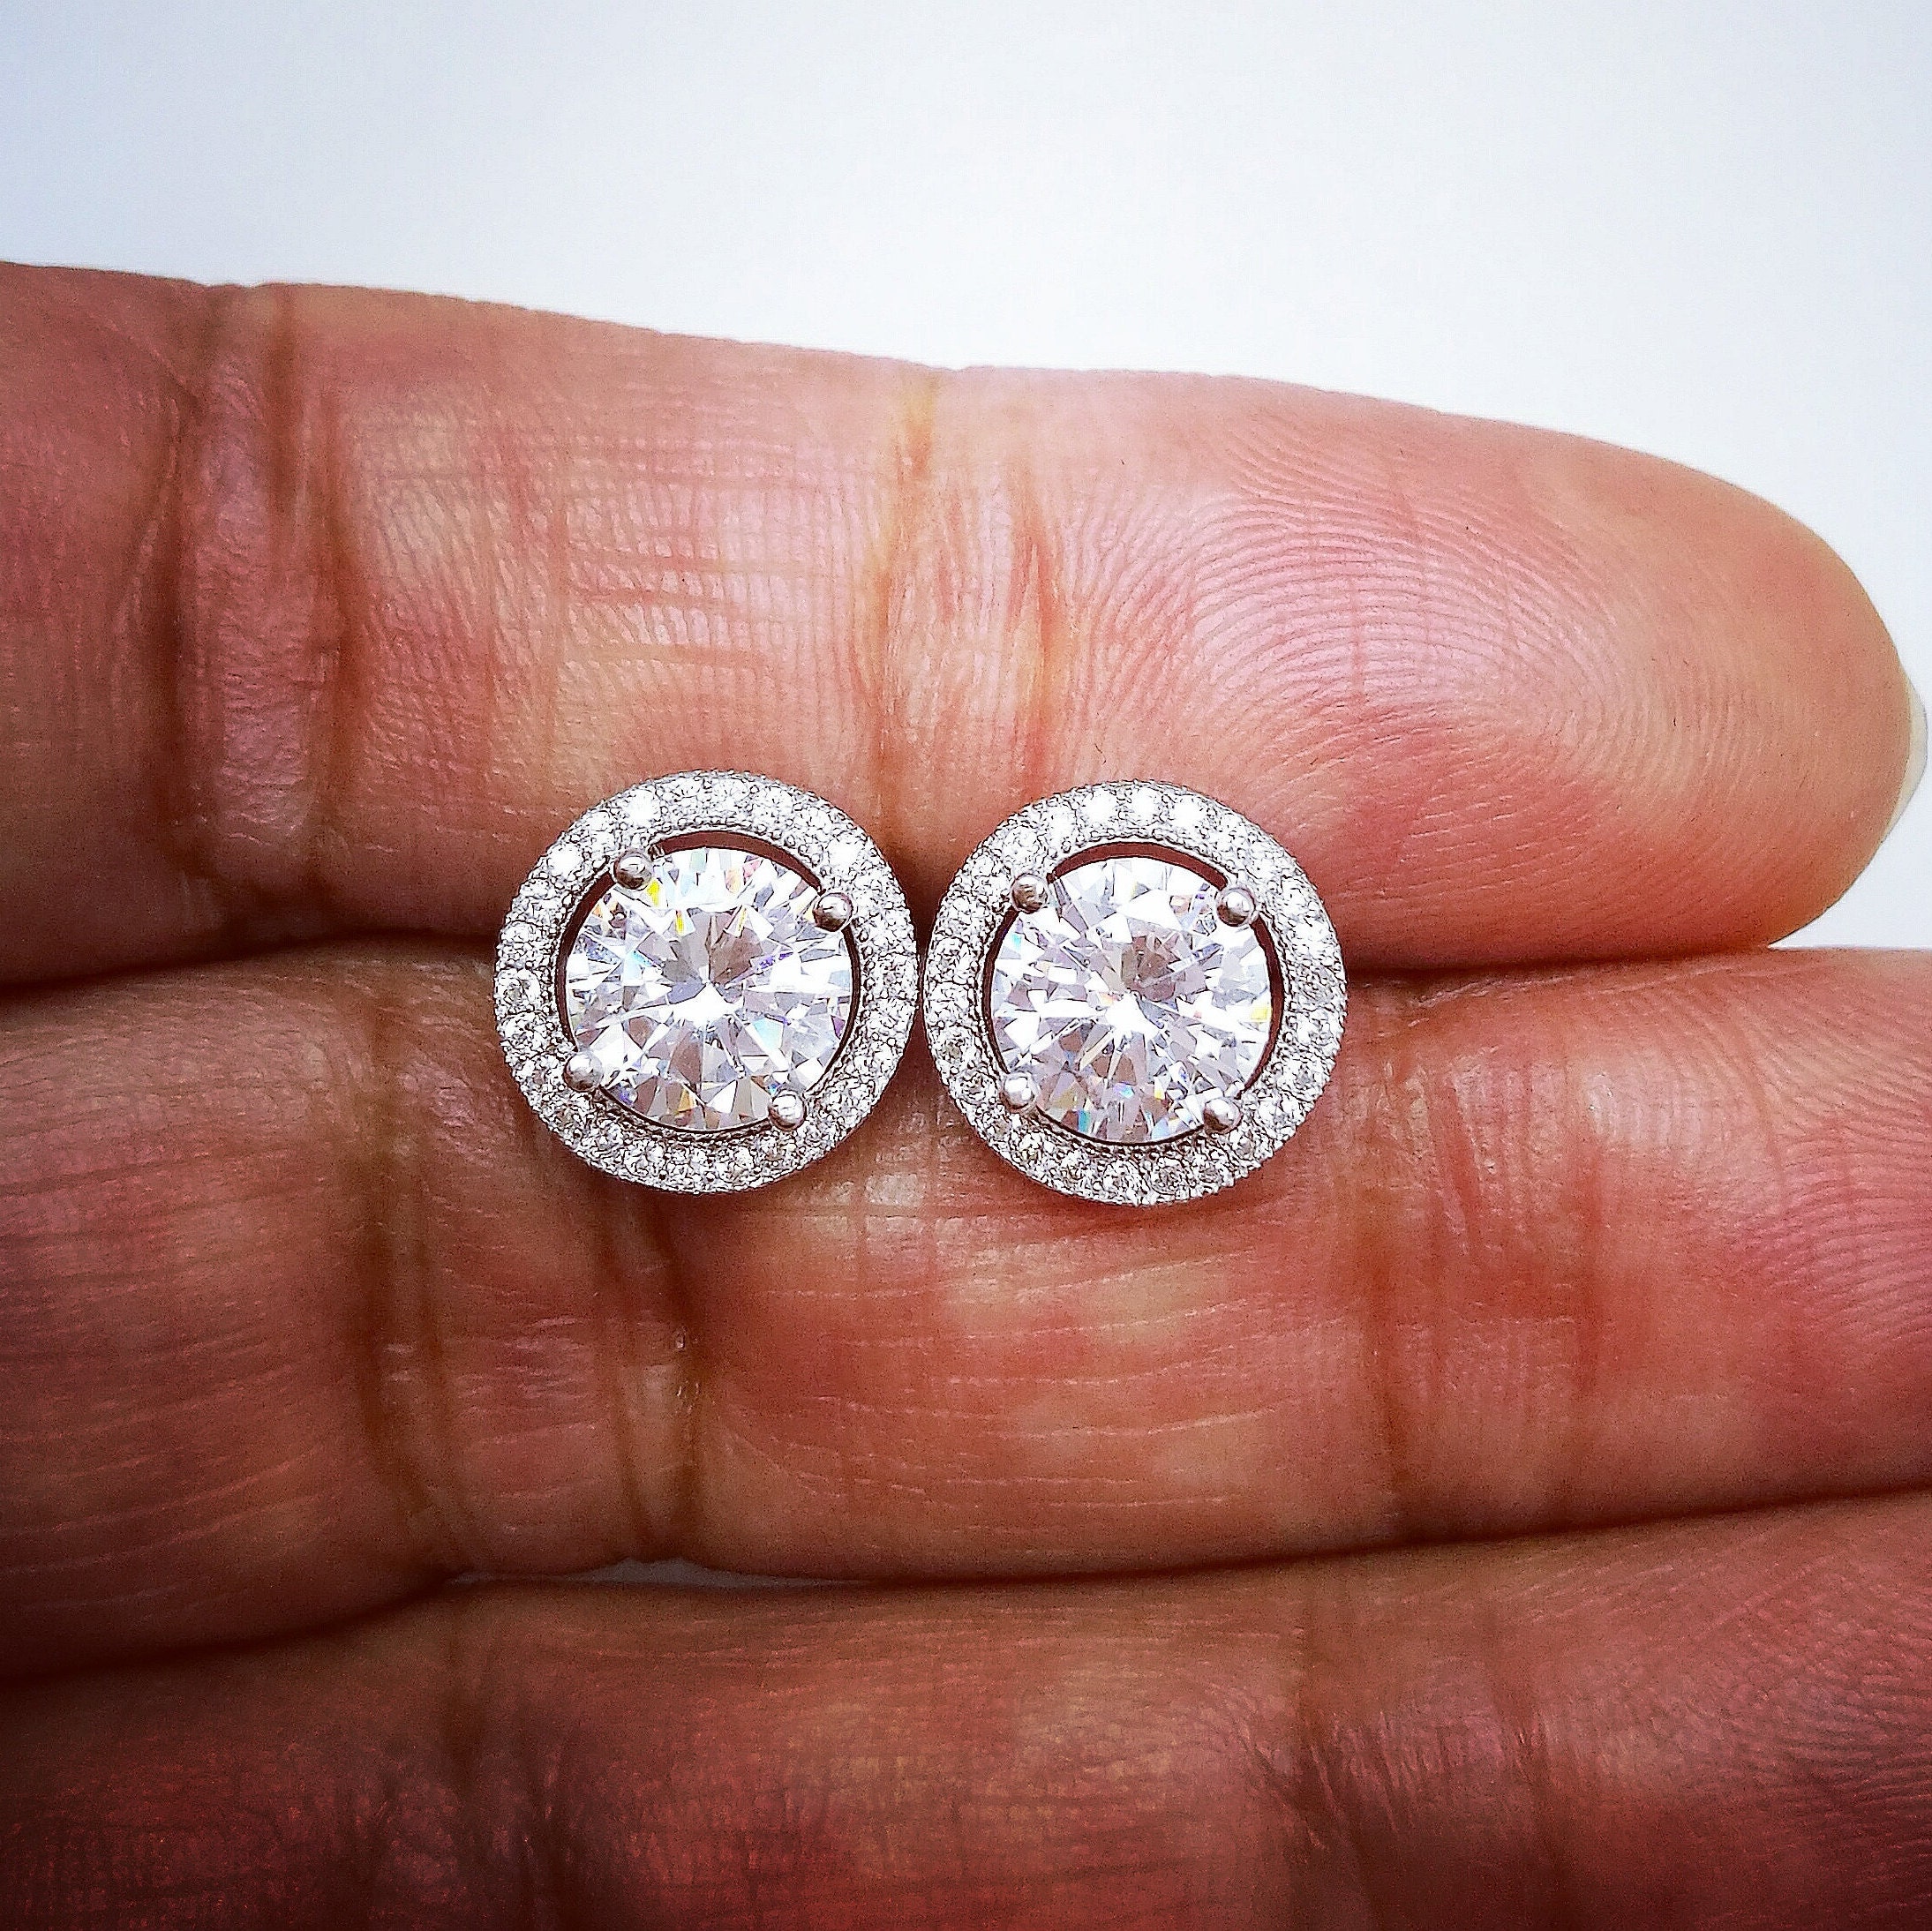 Details about   3 Ct Round VVS1/D Clear Diamond Halo Stud Women's Earrings 14k White Gold Over